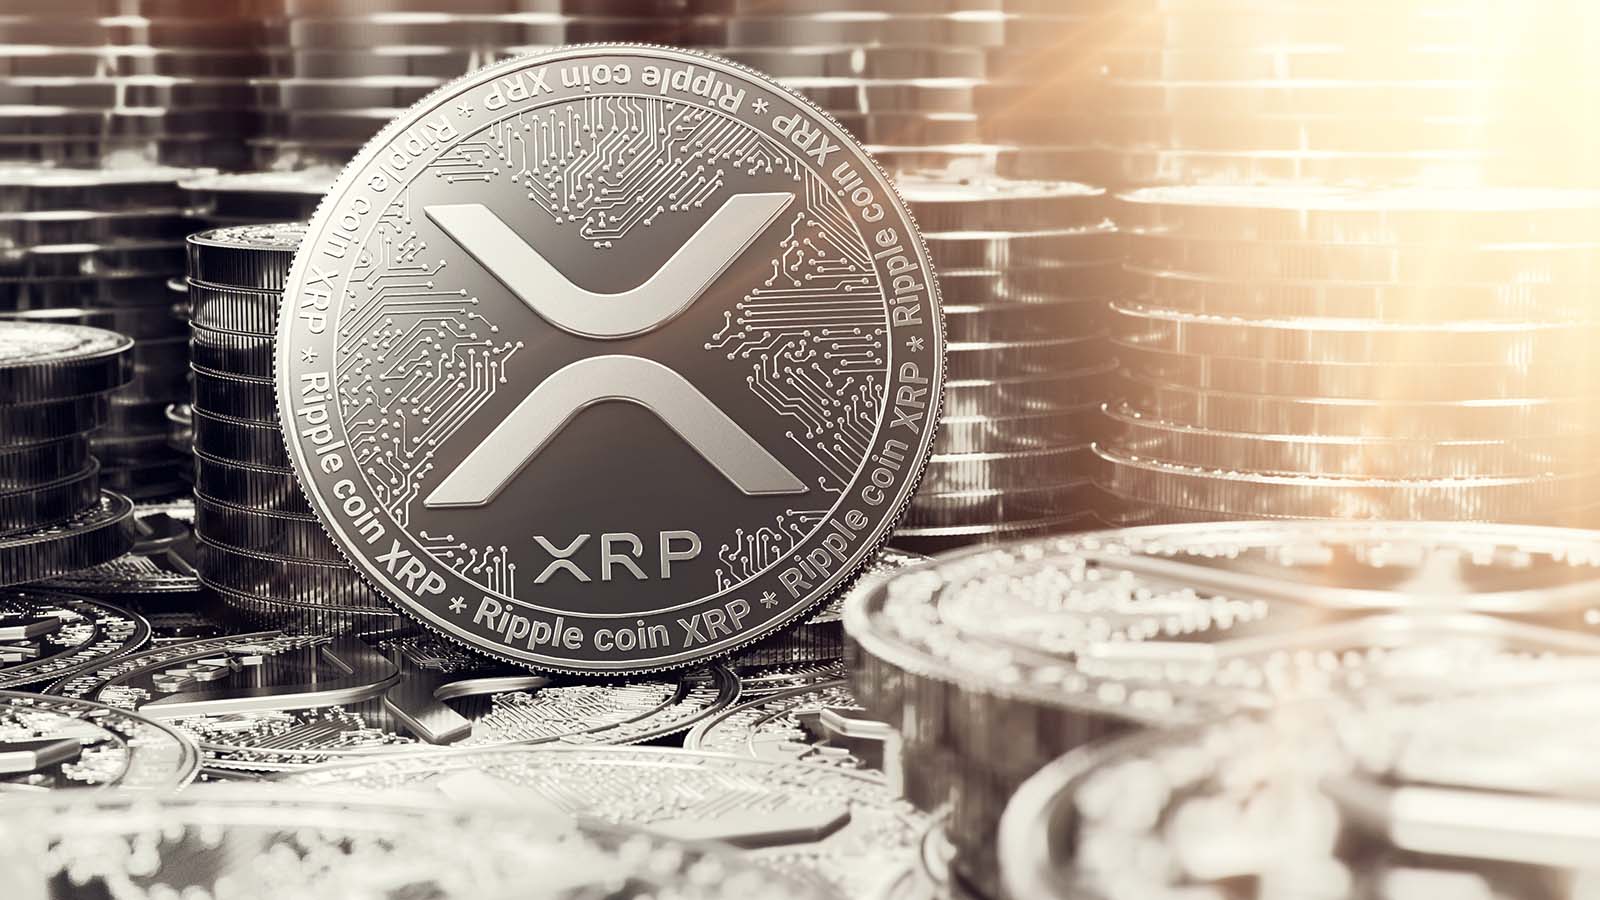 A concept token for XRP (XRP) with stacks of tokens in the background.